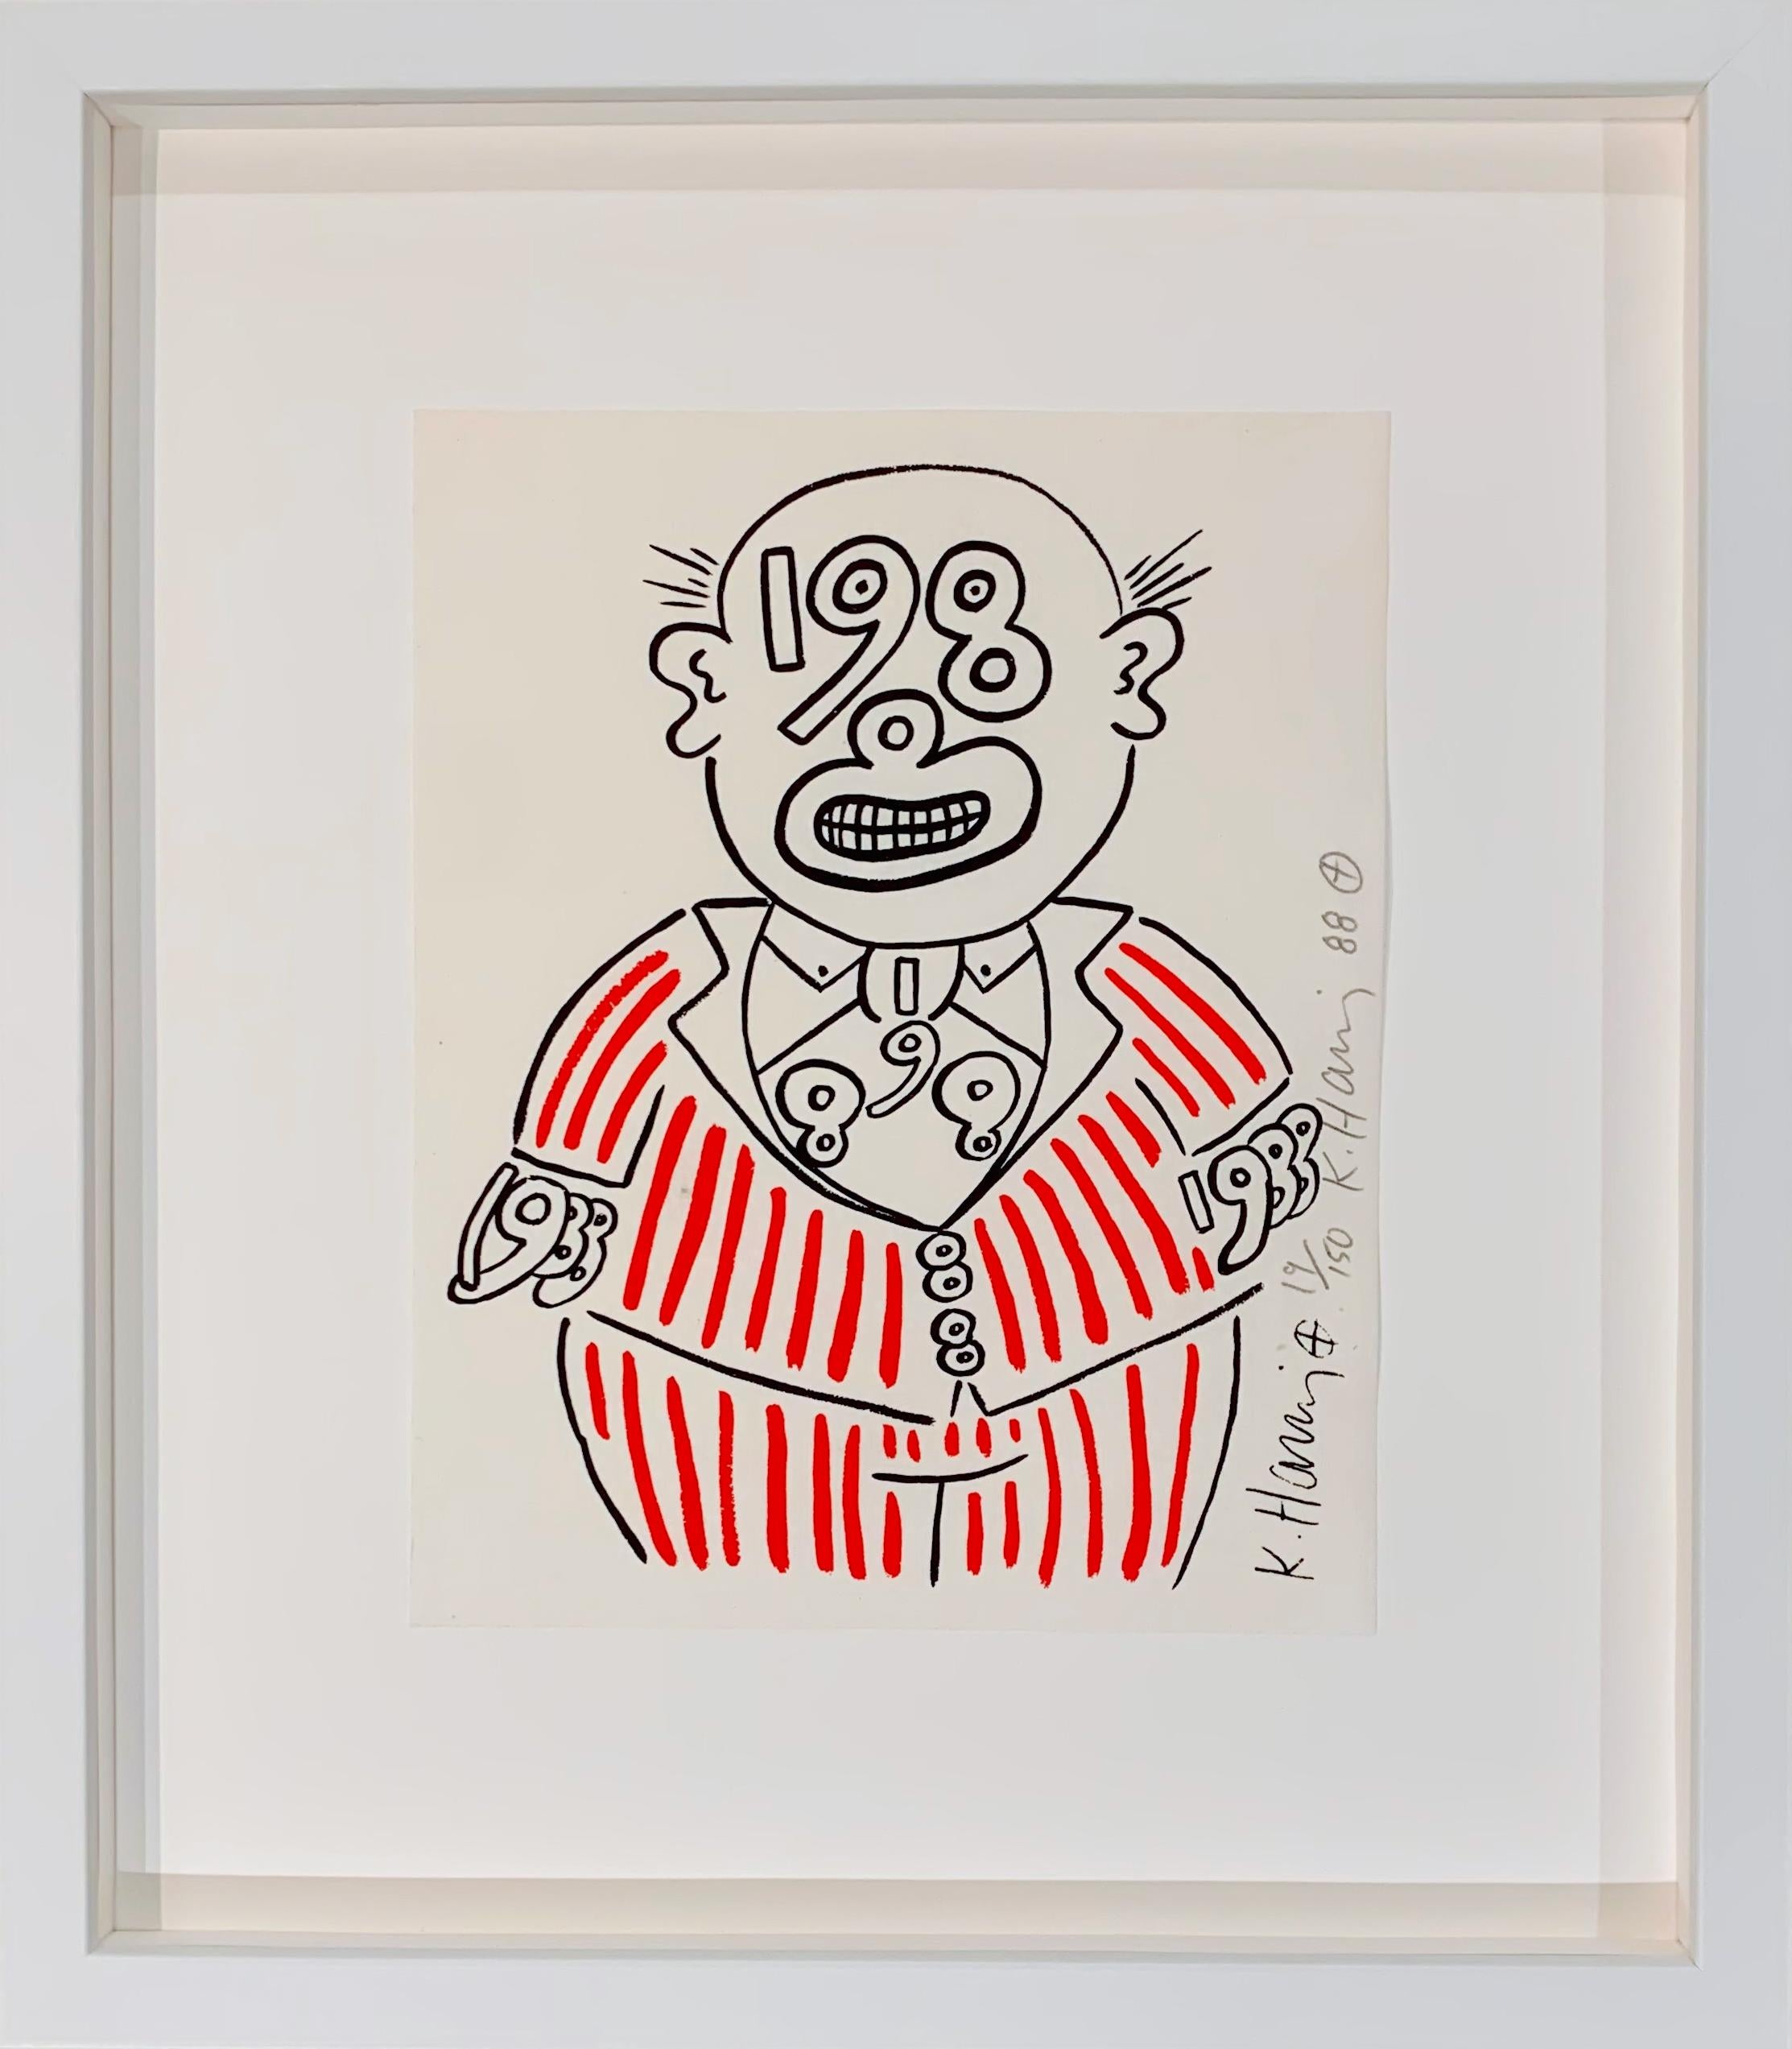 Keith Haring Portrait Print - Untitled, 1988